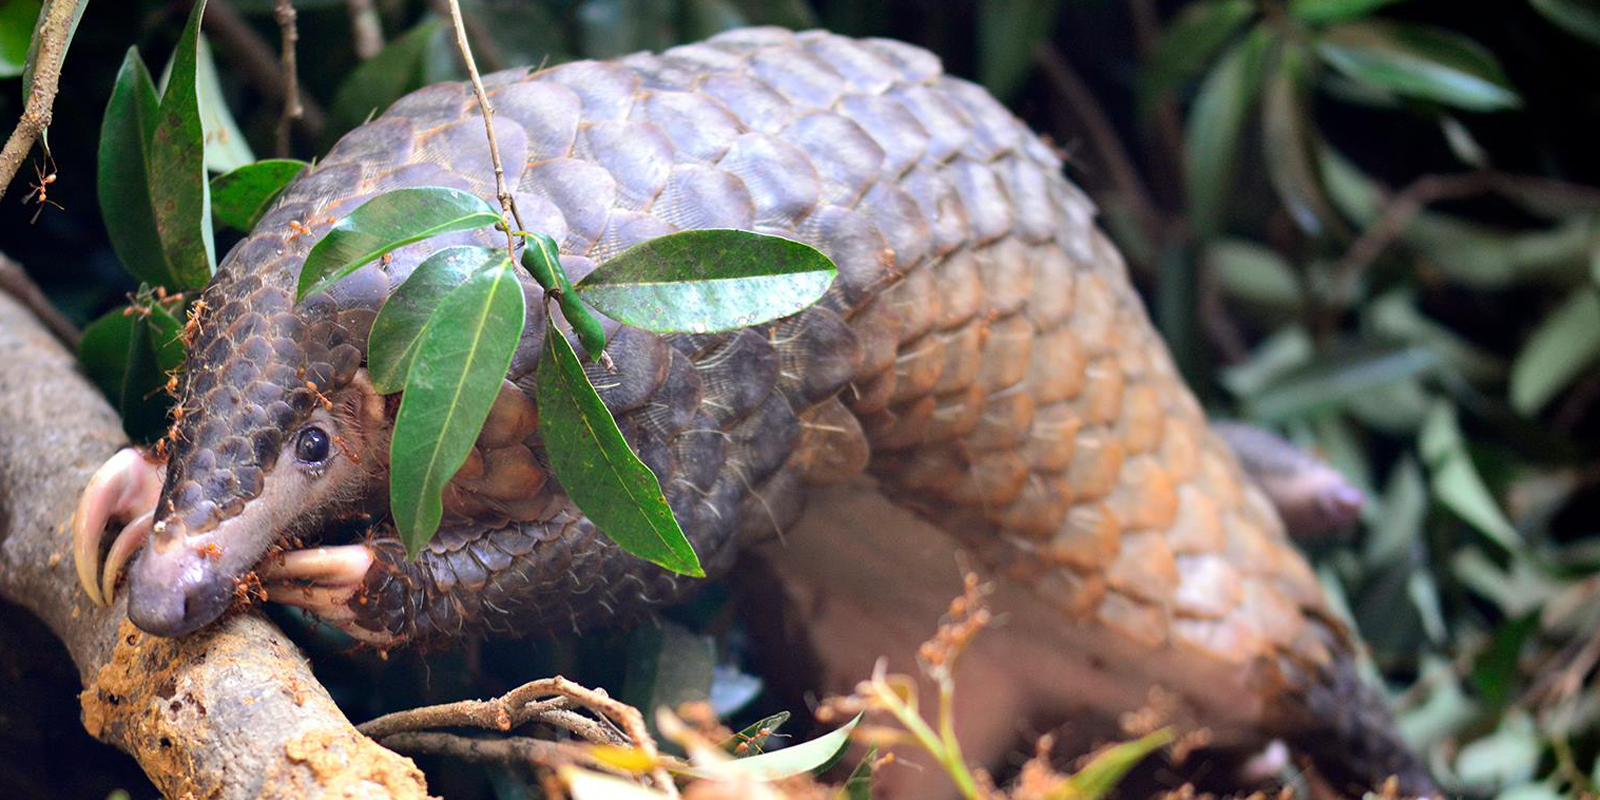 pangolin: the most trafficked mammal in the world